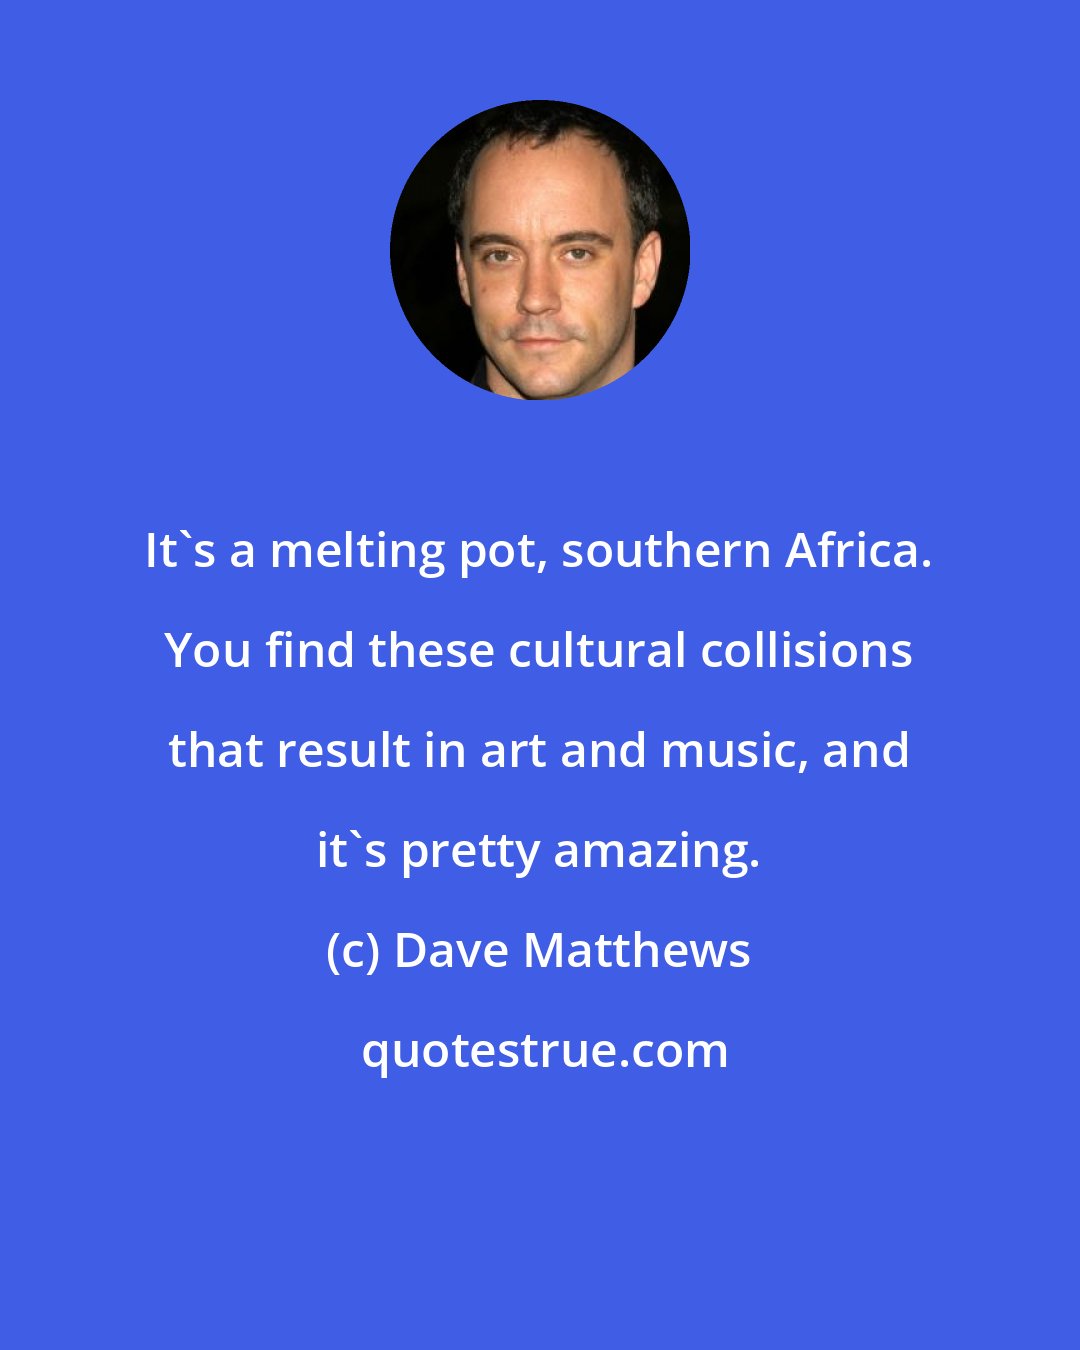 Dave Matthews: It's a melting pot, southern Africa. You find these cultural collisions that result in art and music, and it's pretty amazing.